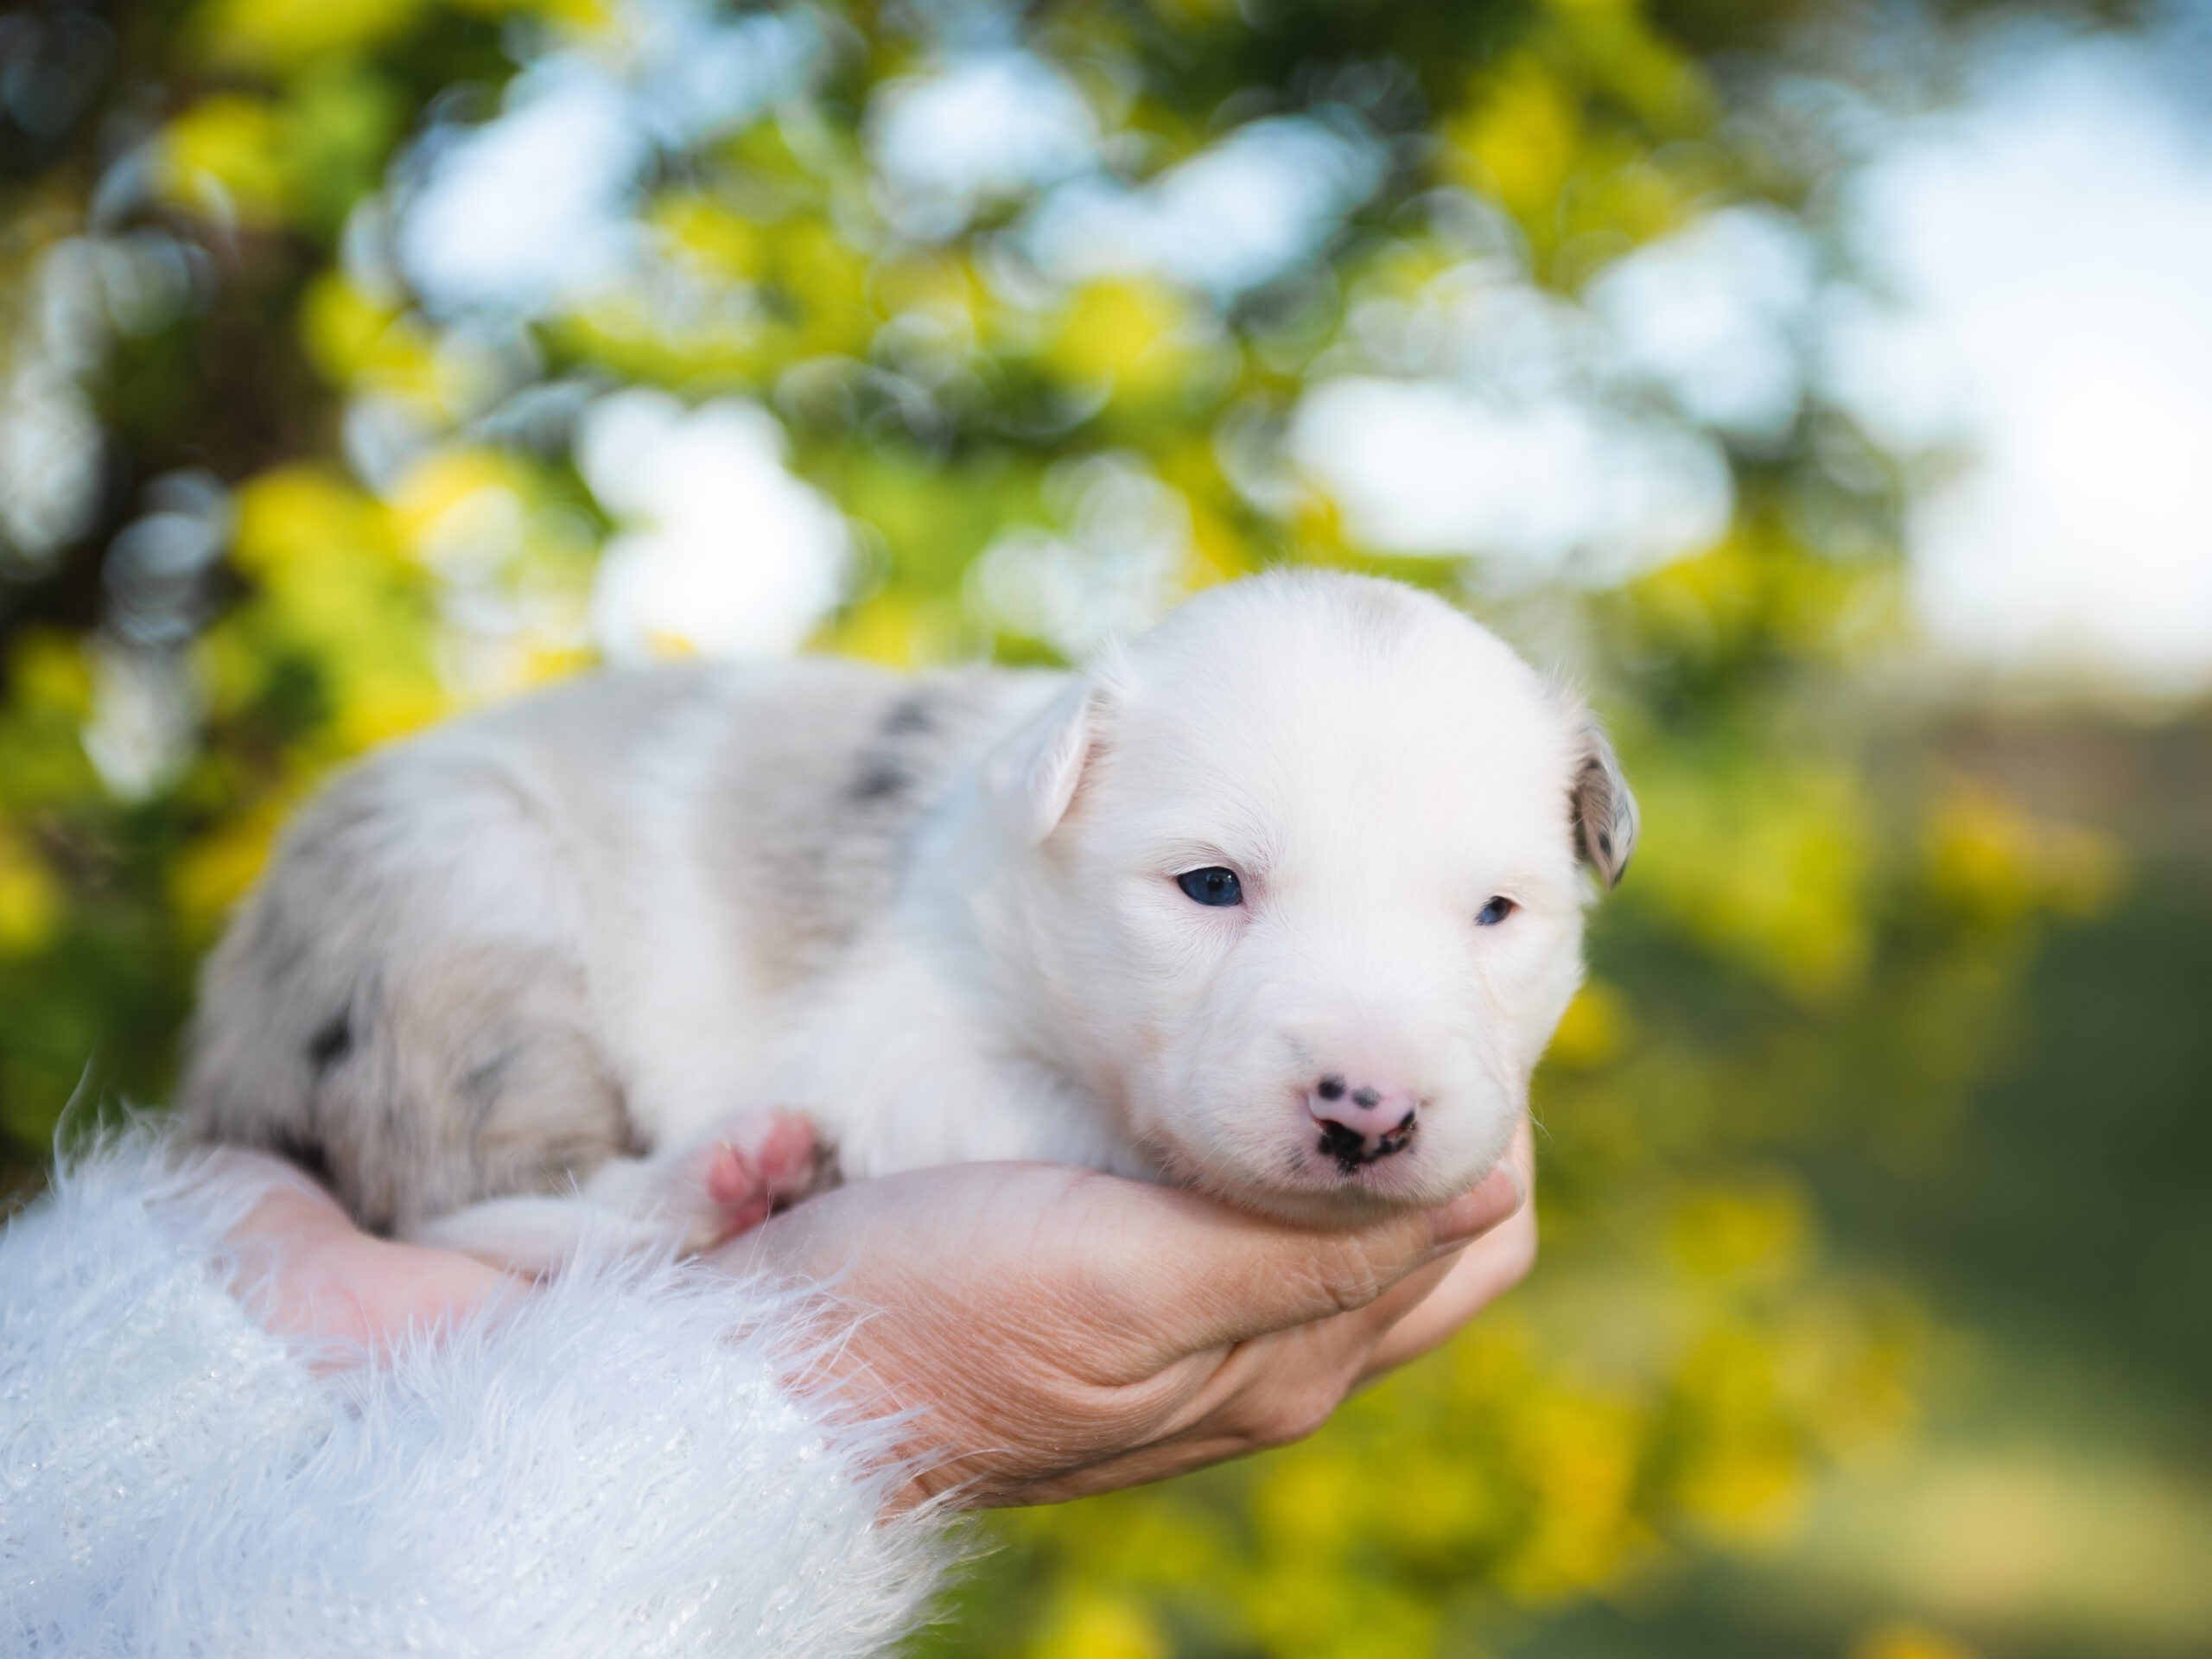 Blue merle Border Collie puppy for sale in Florida.